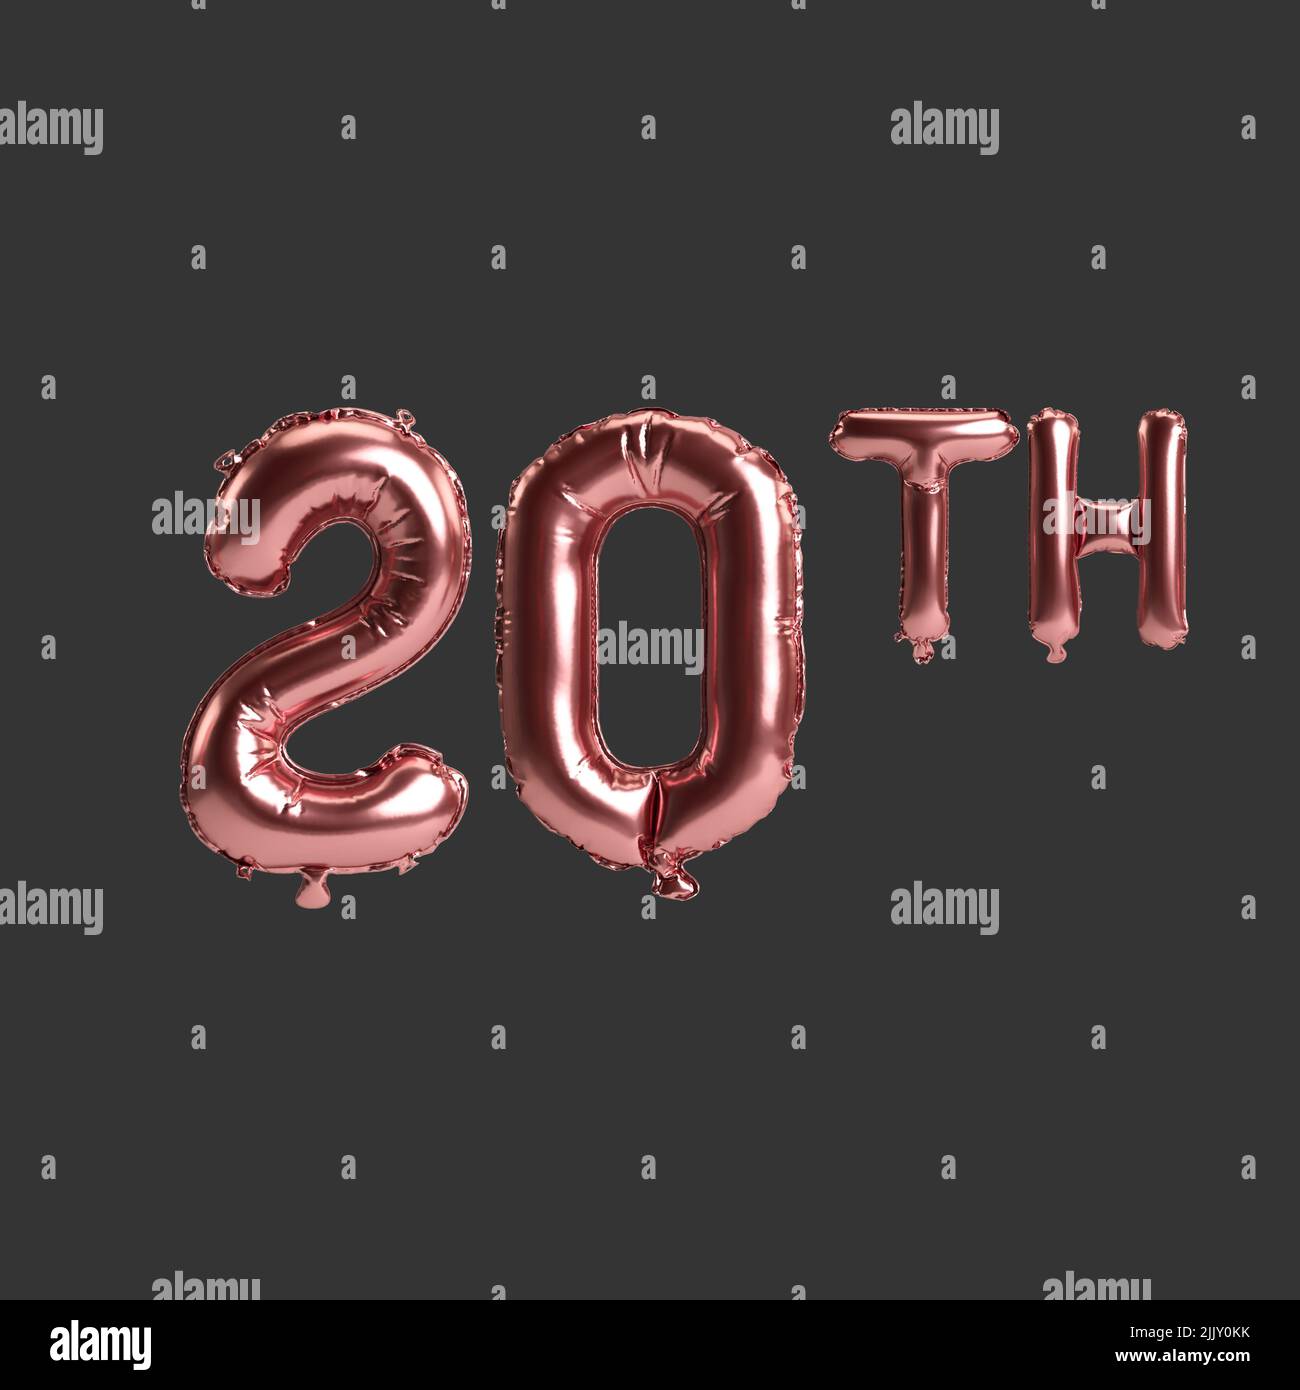 3d illustration of 20th metal rose balloons isolated on black background Stock Photo